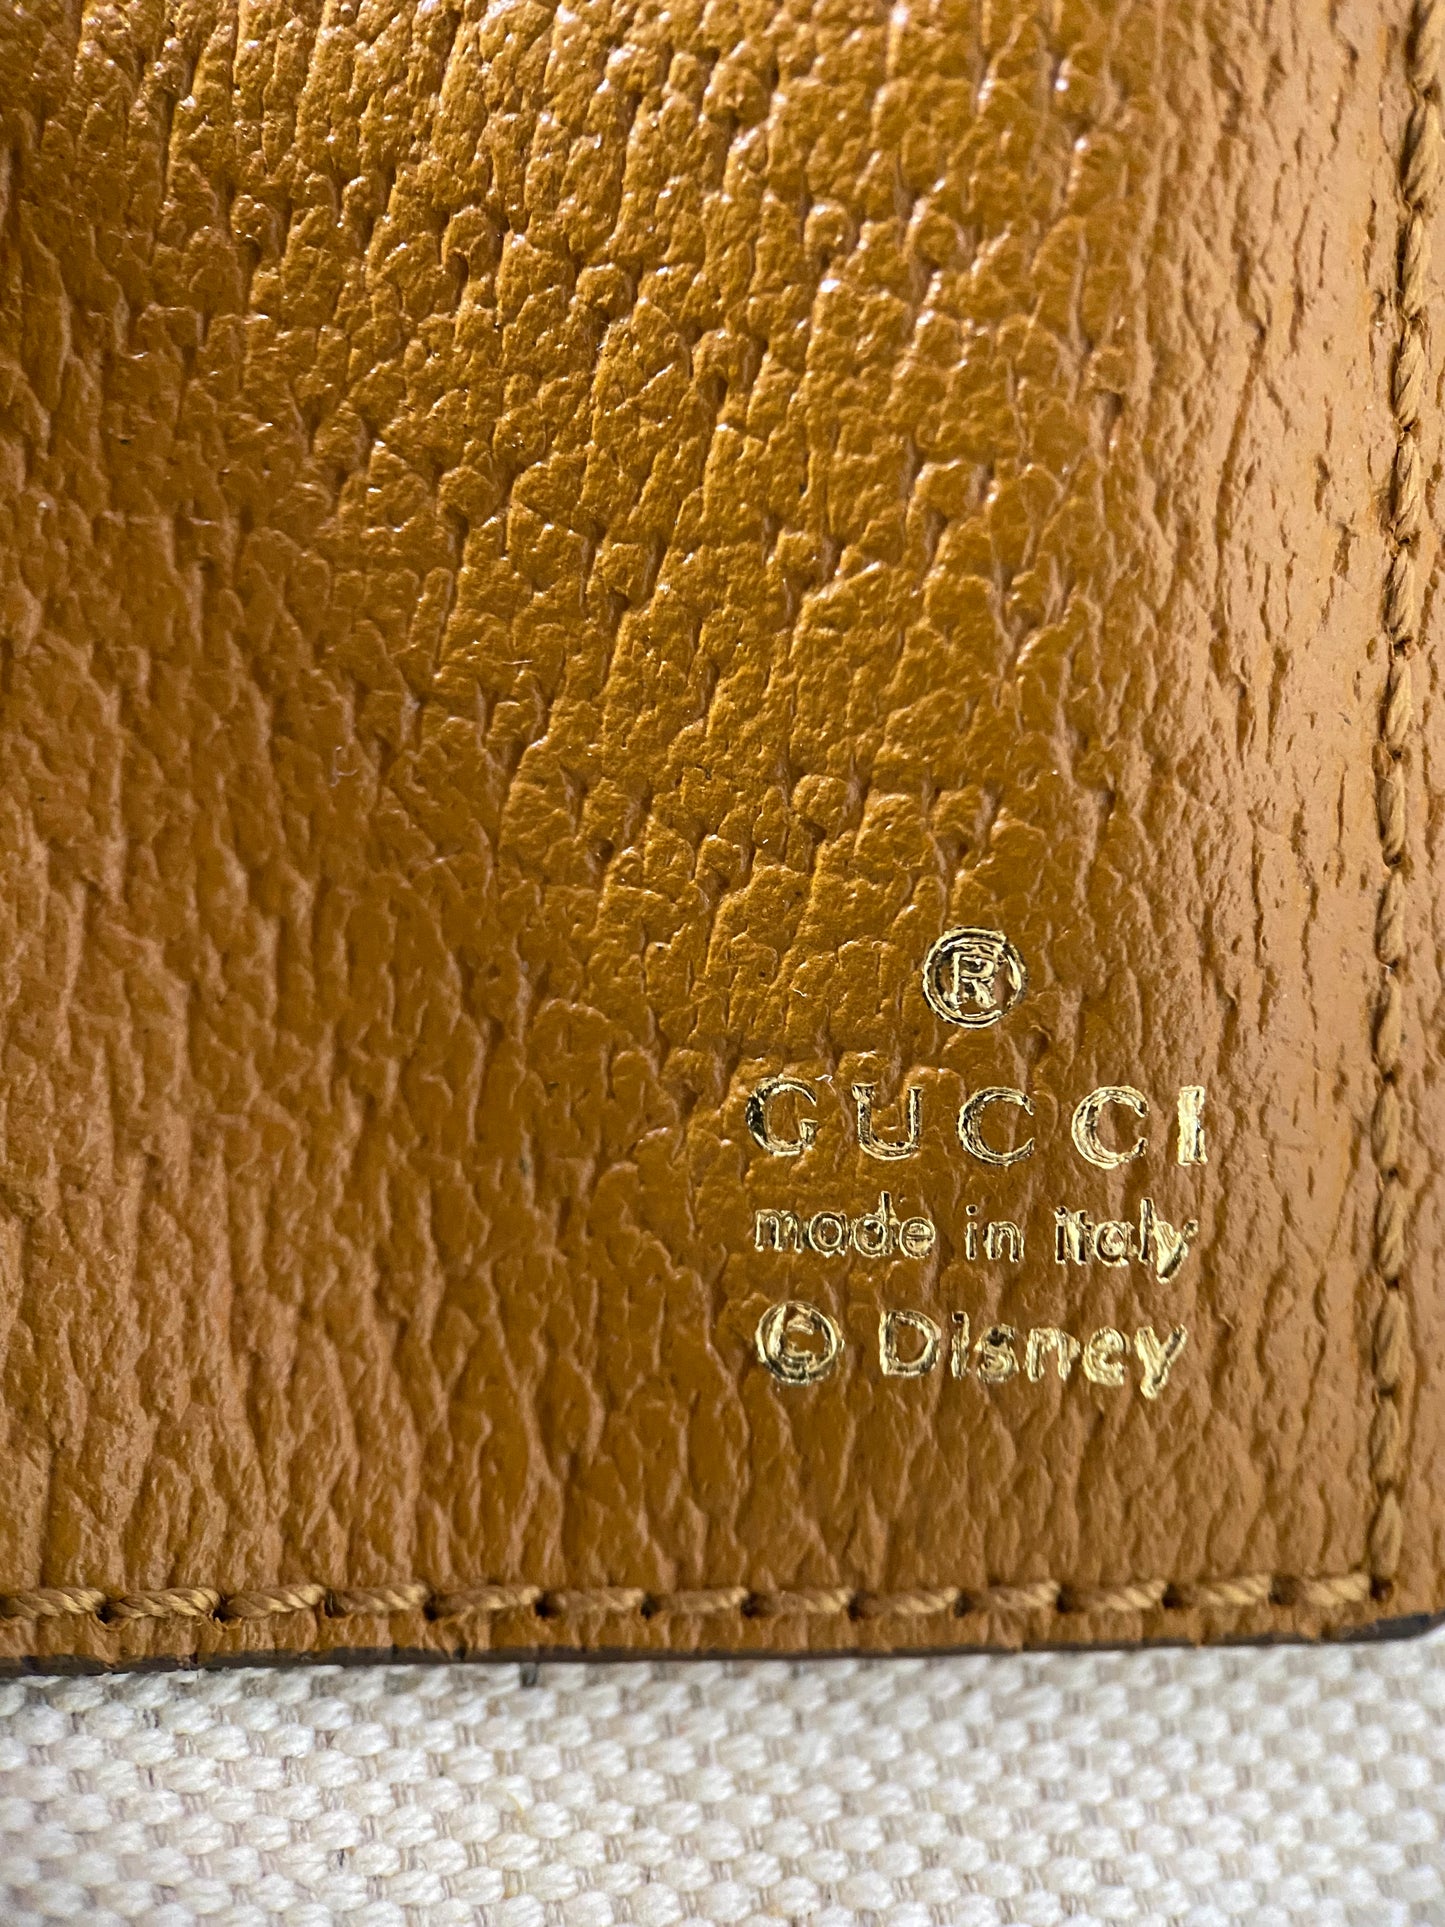 Gucci & Disney Leather Clutch Bag Mickey Mouse Print